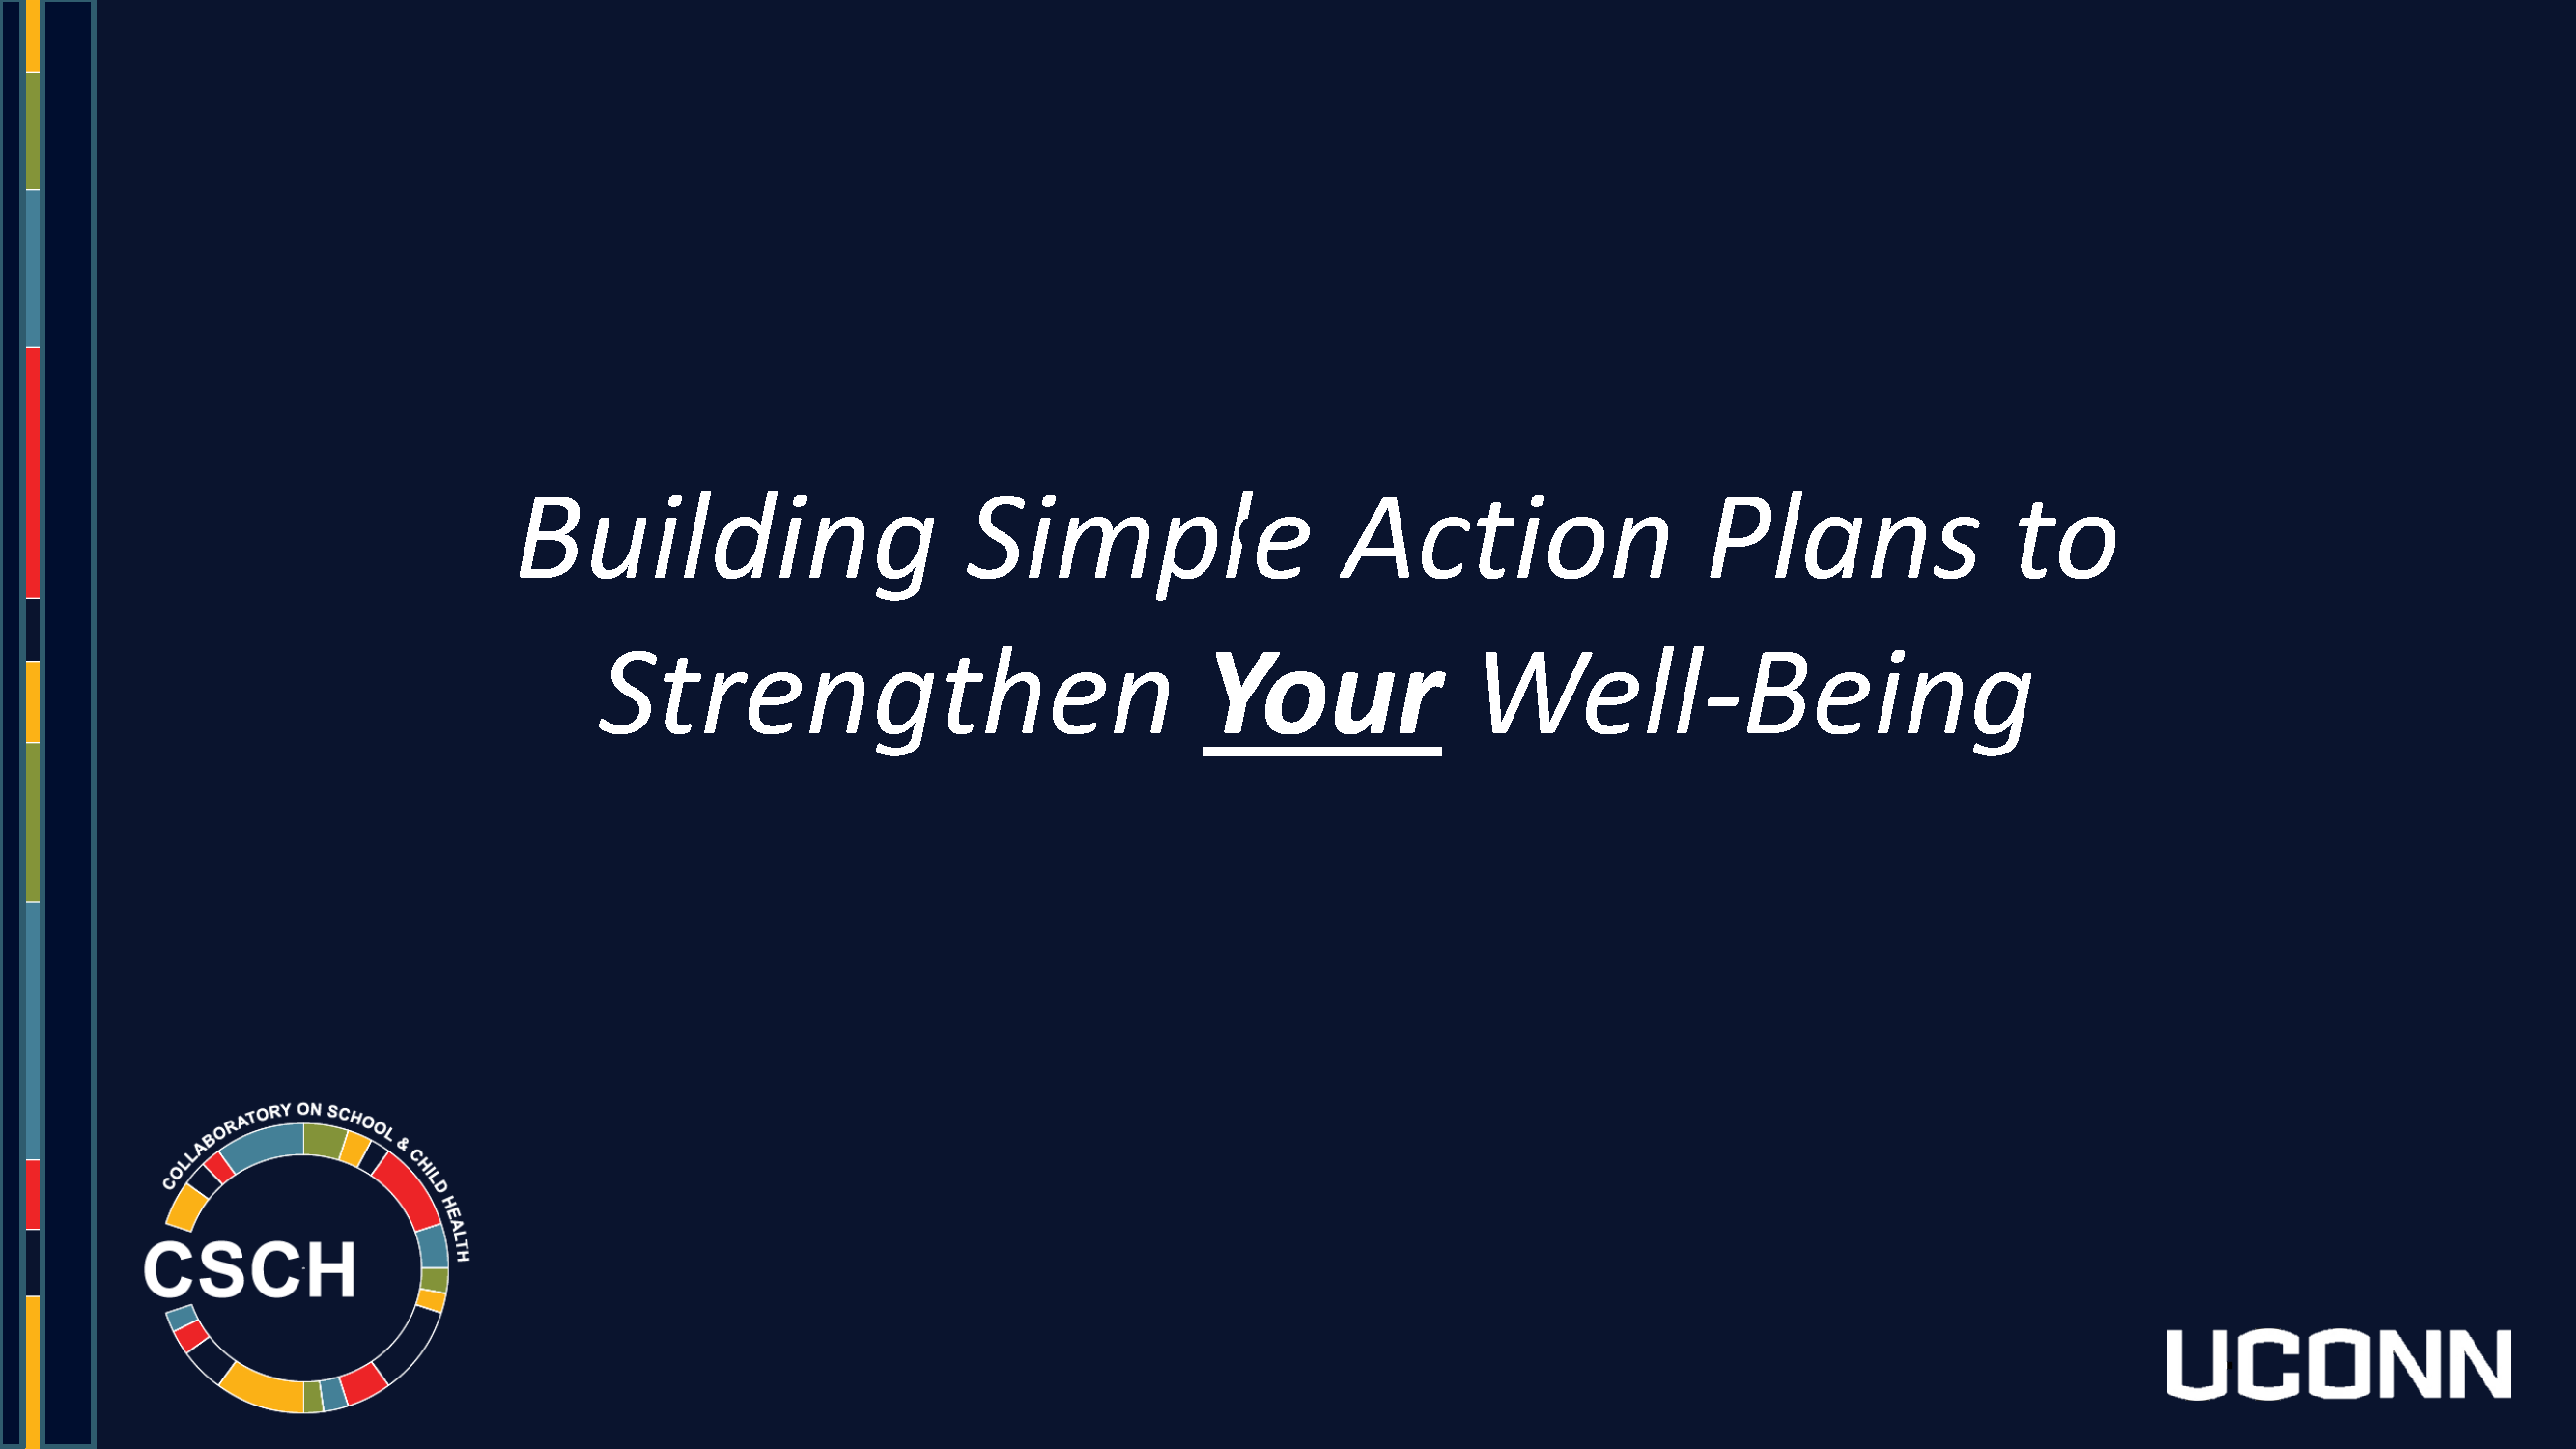 Building Simple Action Plans to Strengthen Your Well-being with CSCH and UConn Logos